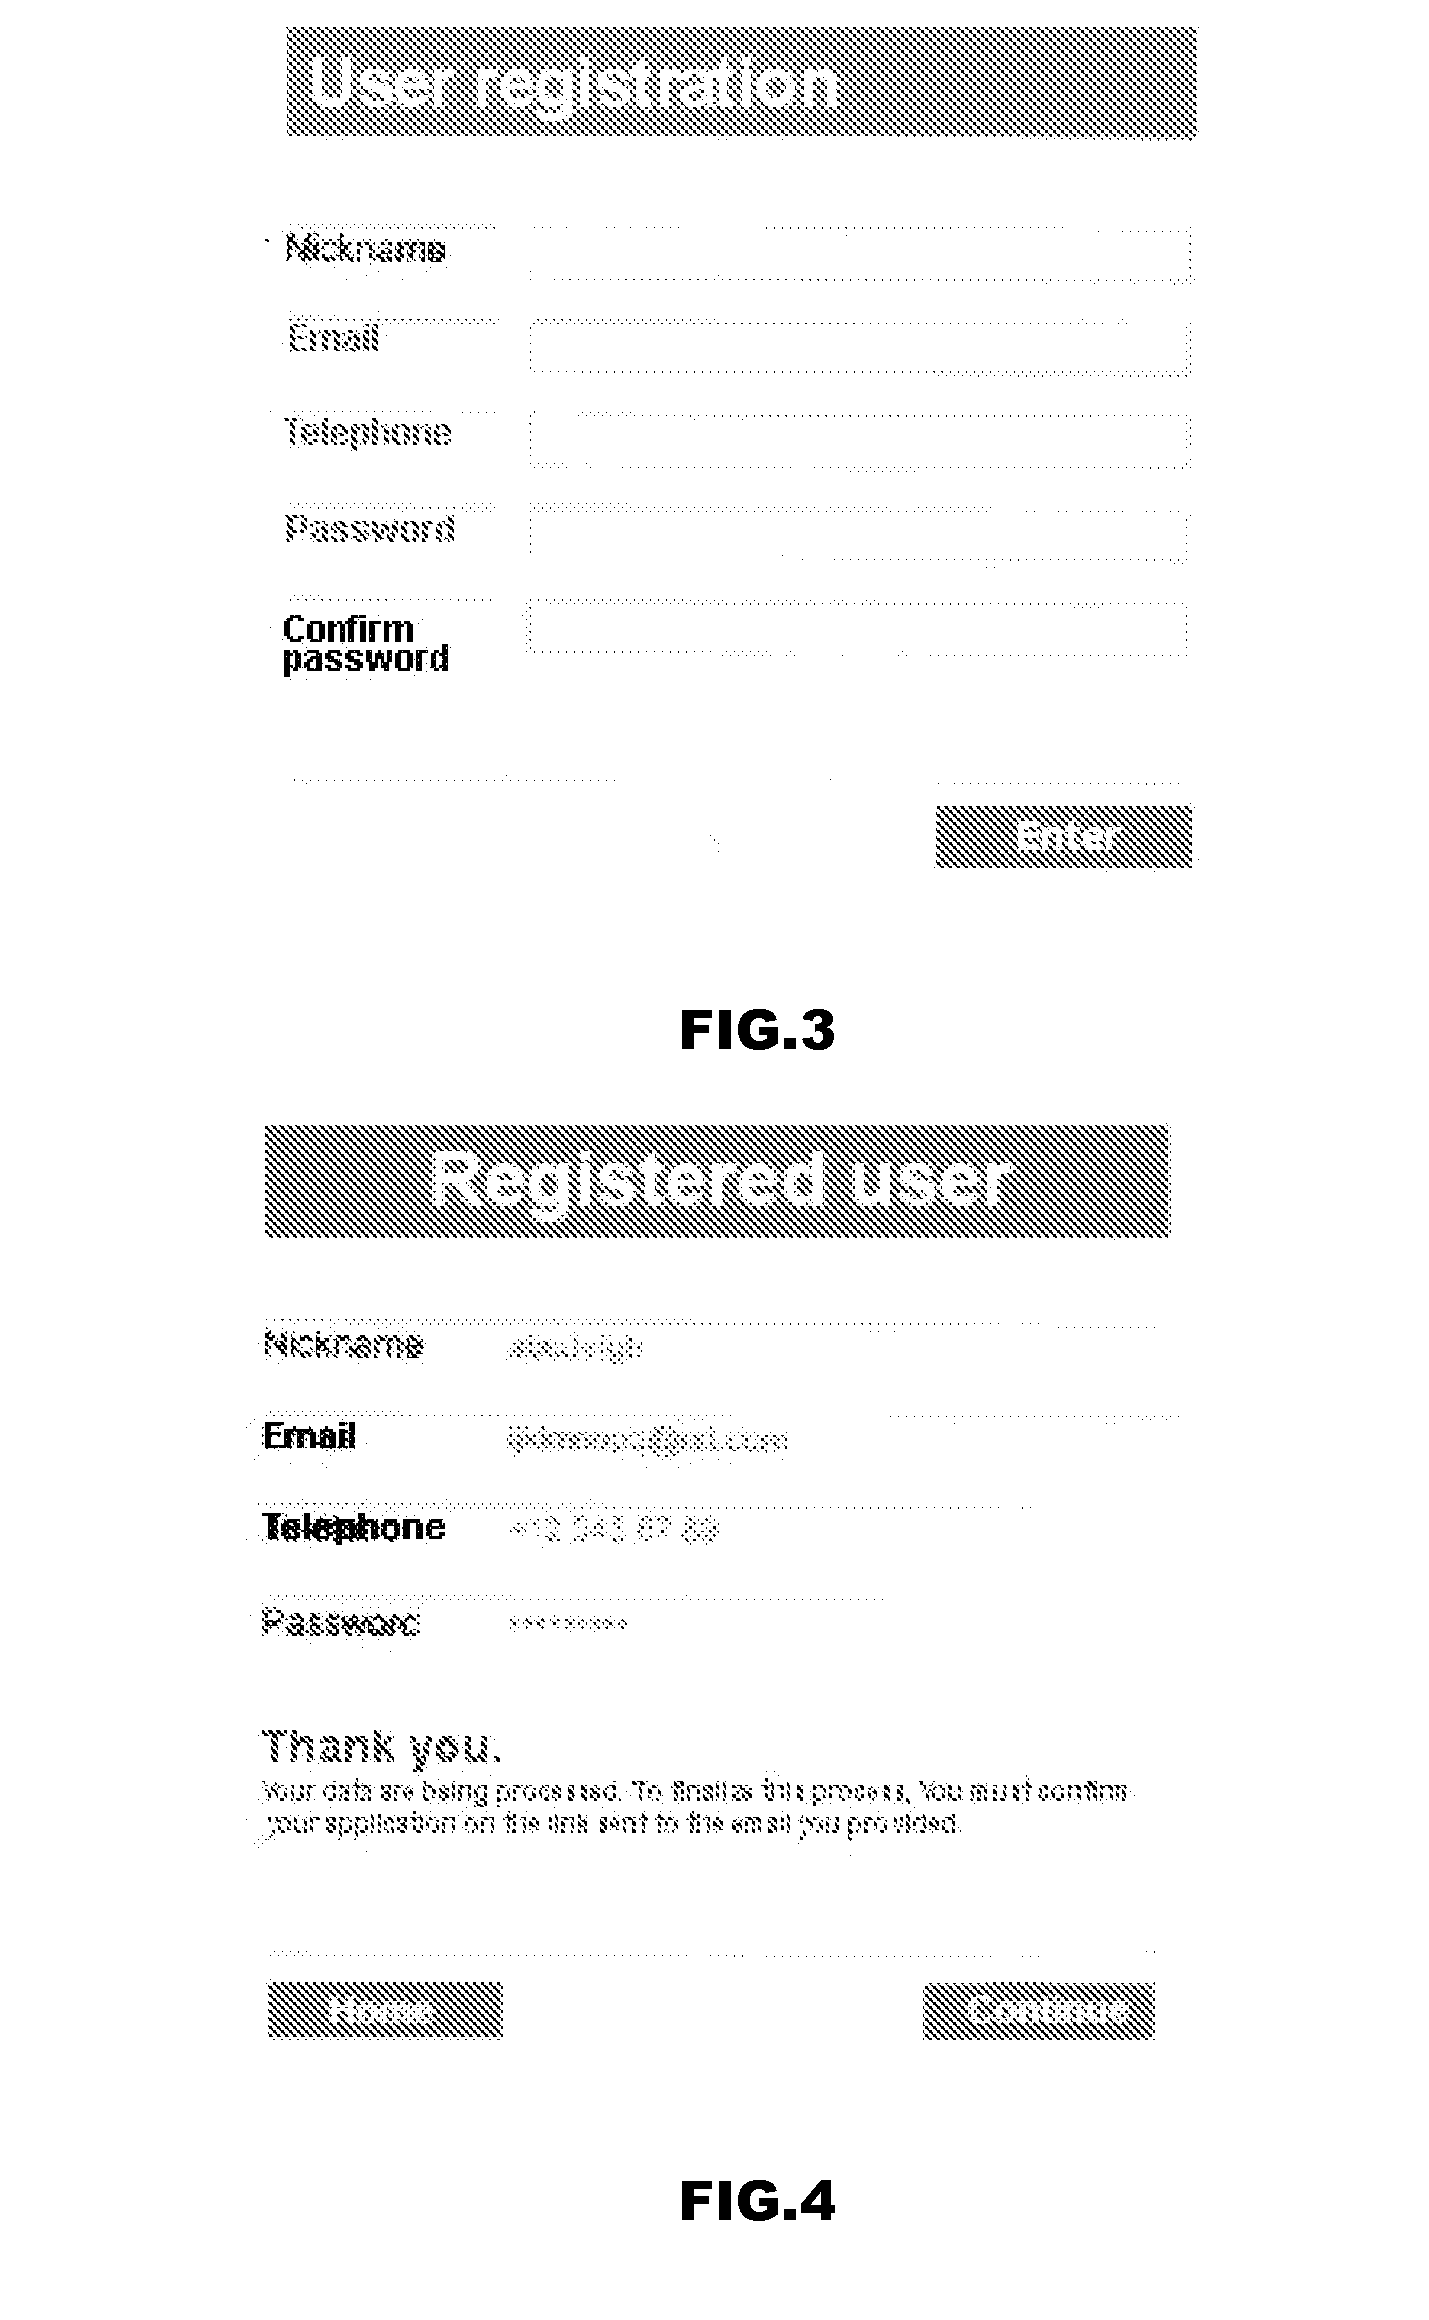 Method and System of Communication That Allow People Unknown to Each Other Who Have Visual Contact to Communicate by SMS or E-mail